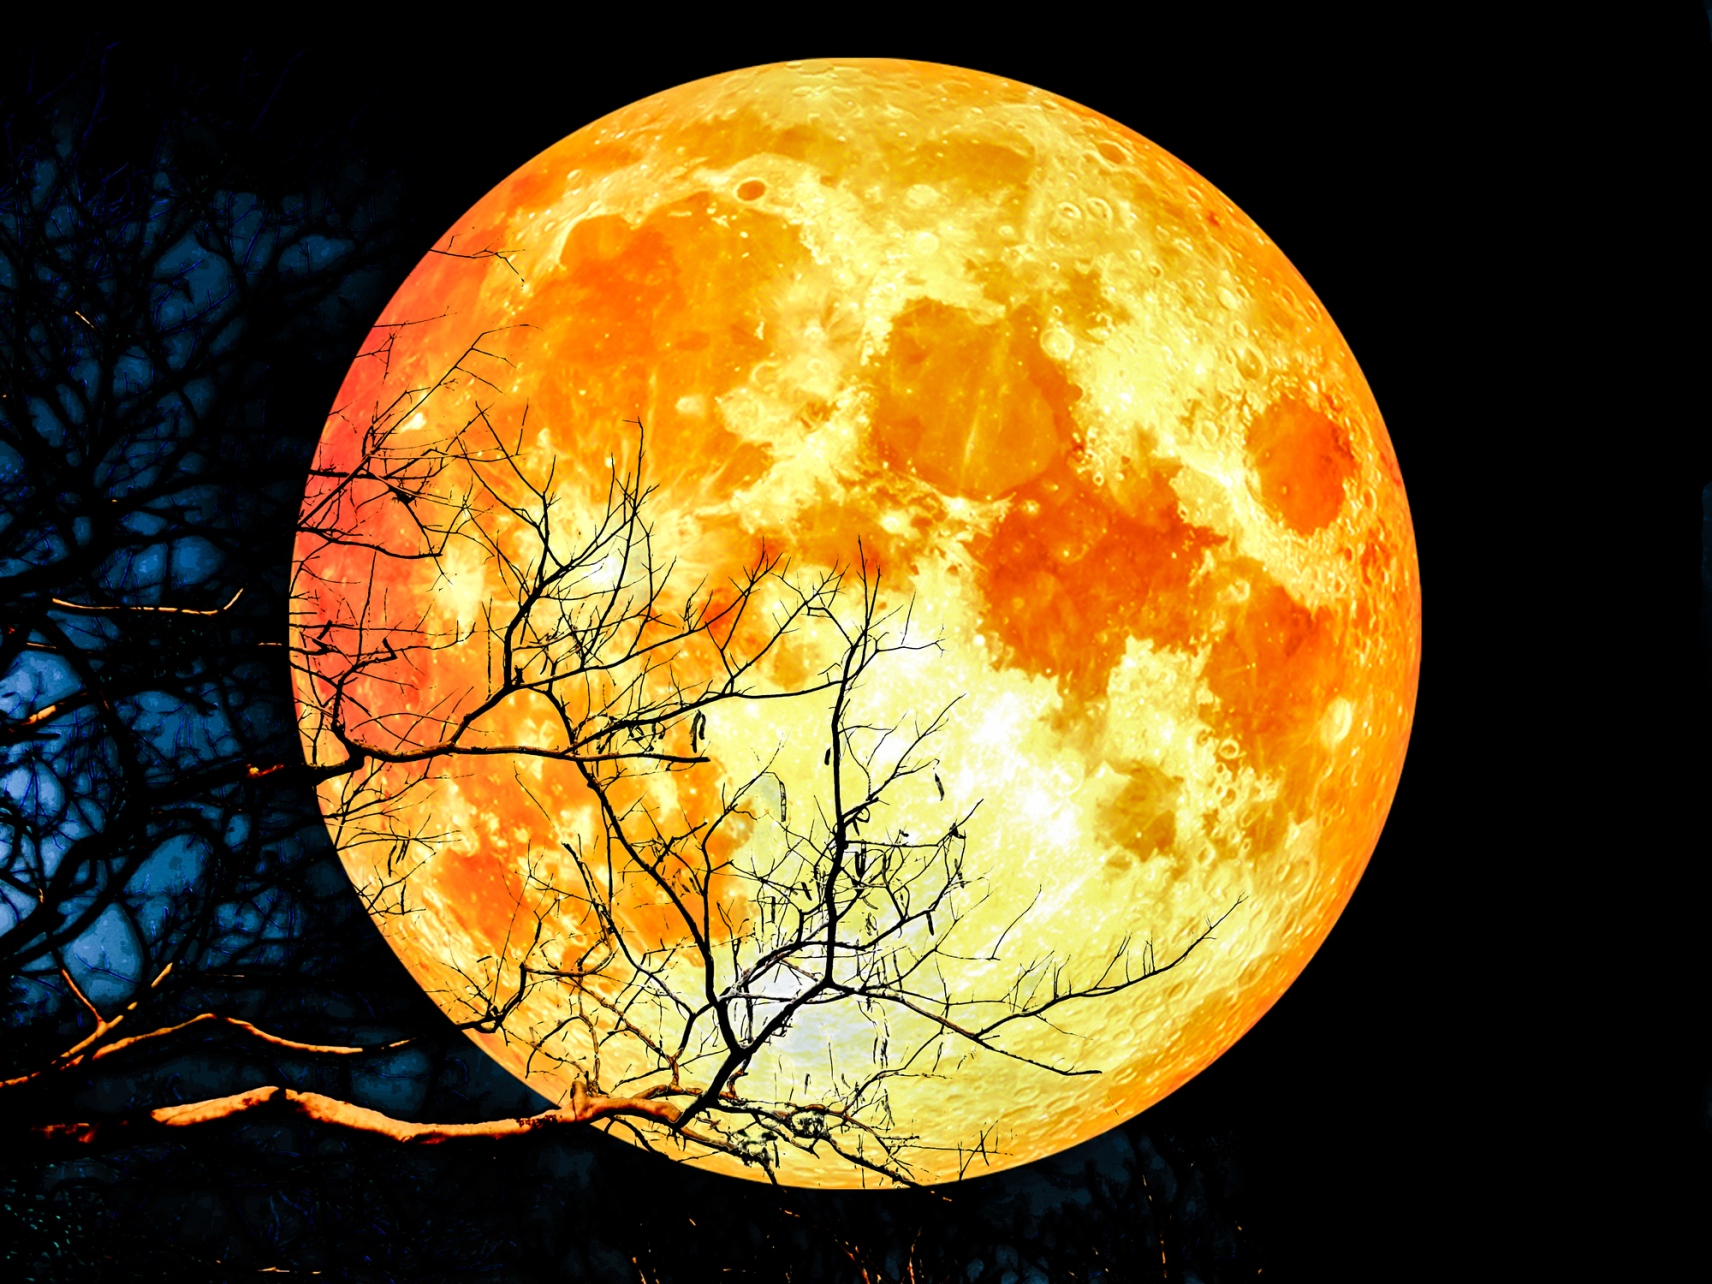 Blood red super moon will rise on January 31